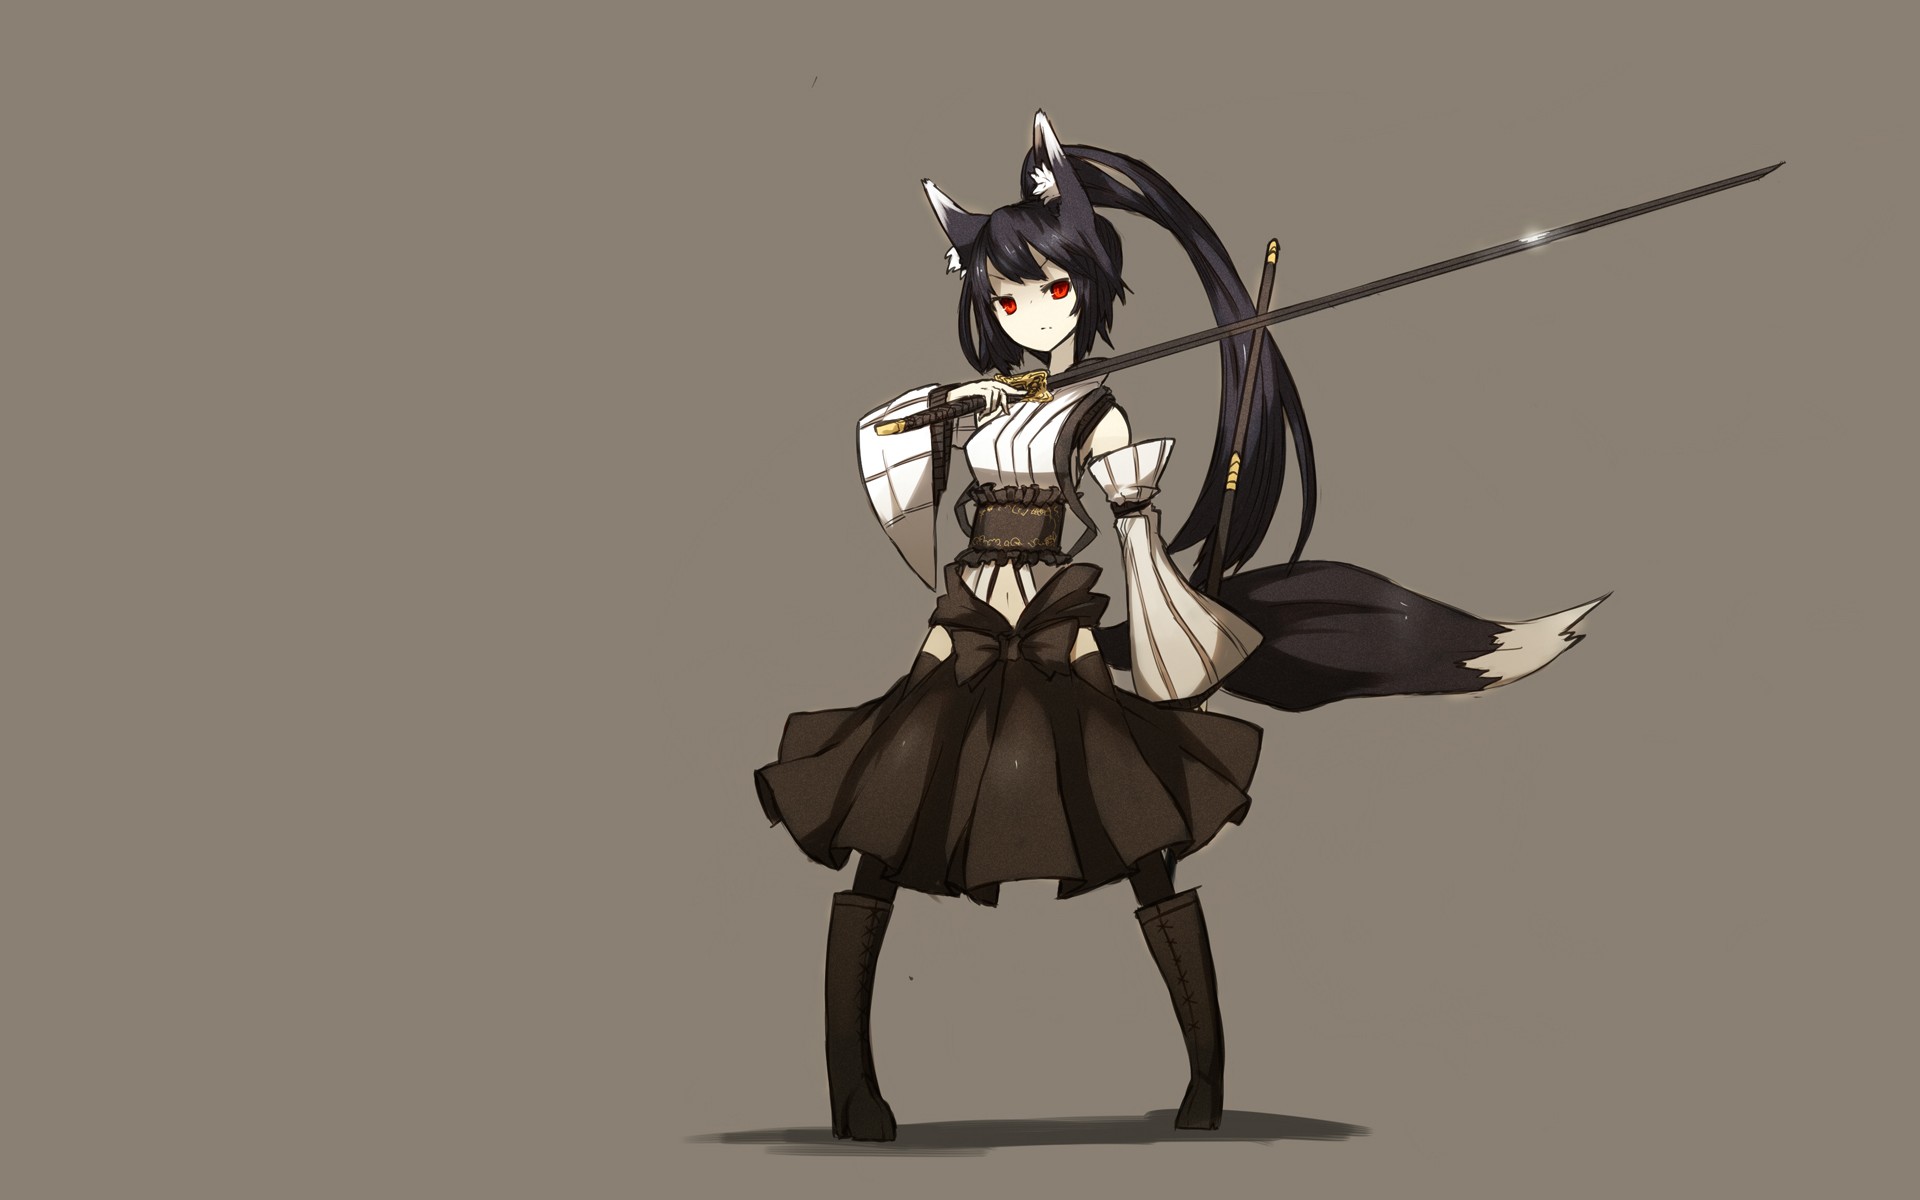 boots, Tails, Skirts, Long, Hair, Weapons, Animal, Ears, Red, Eyes